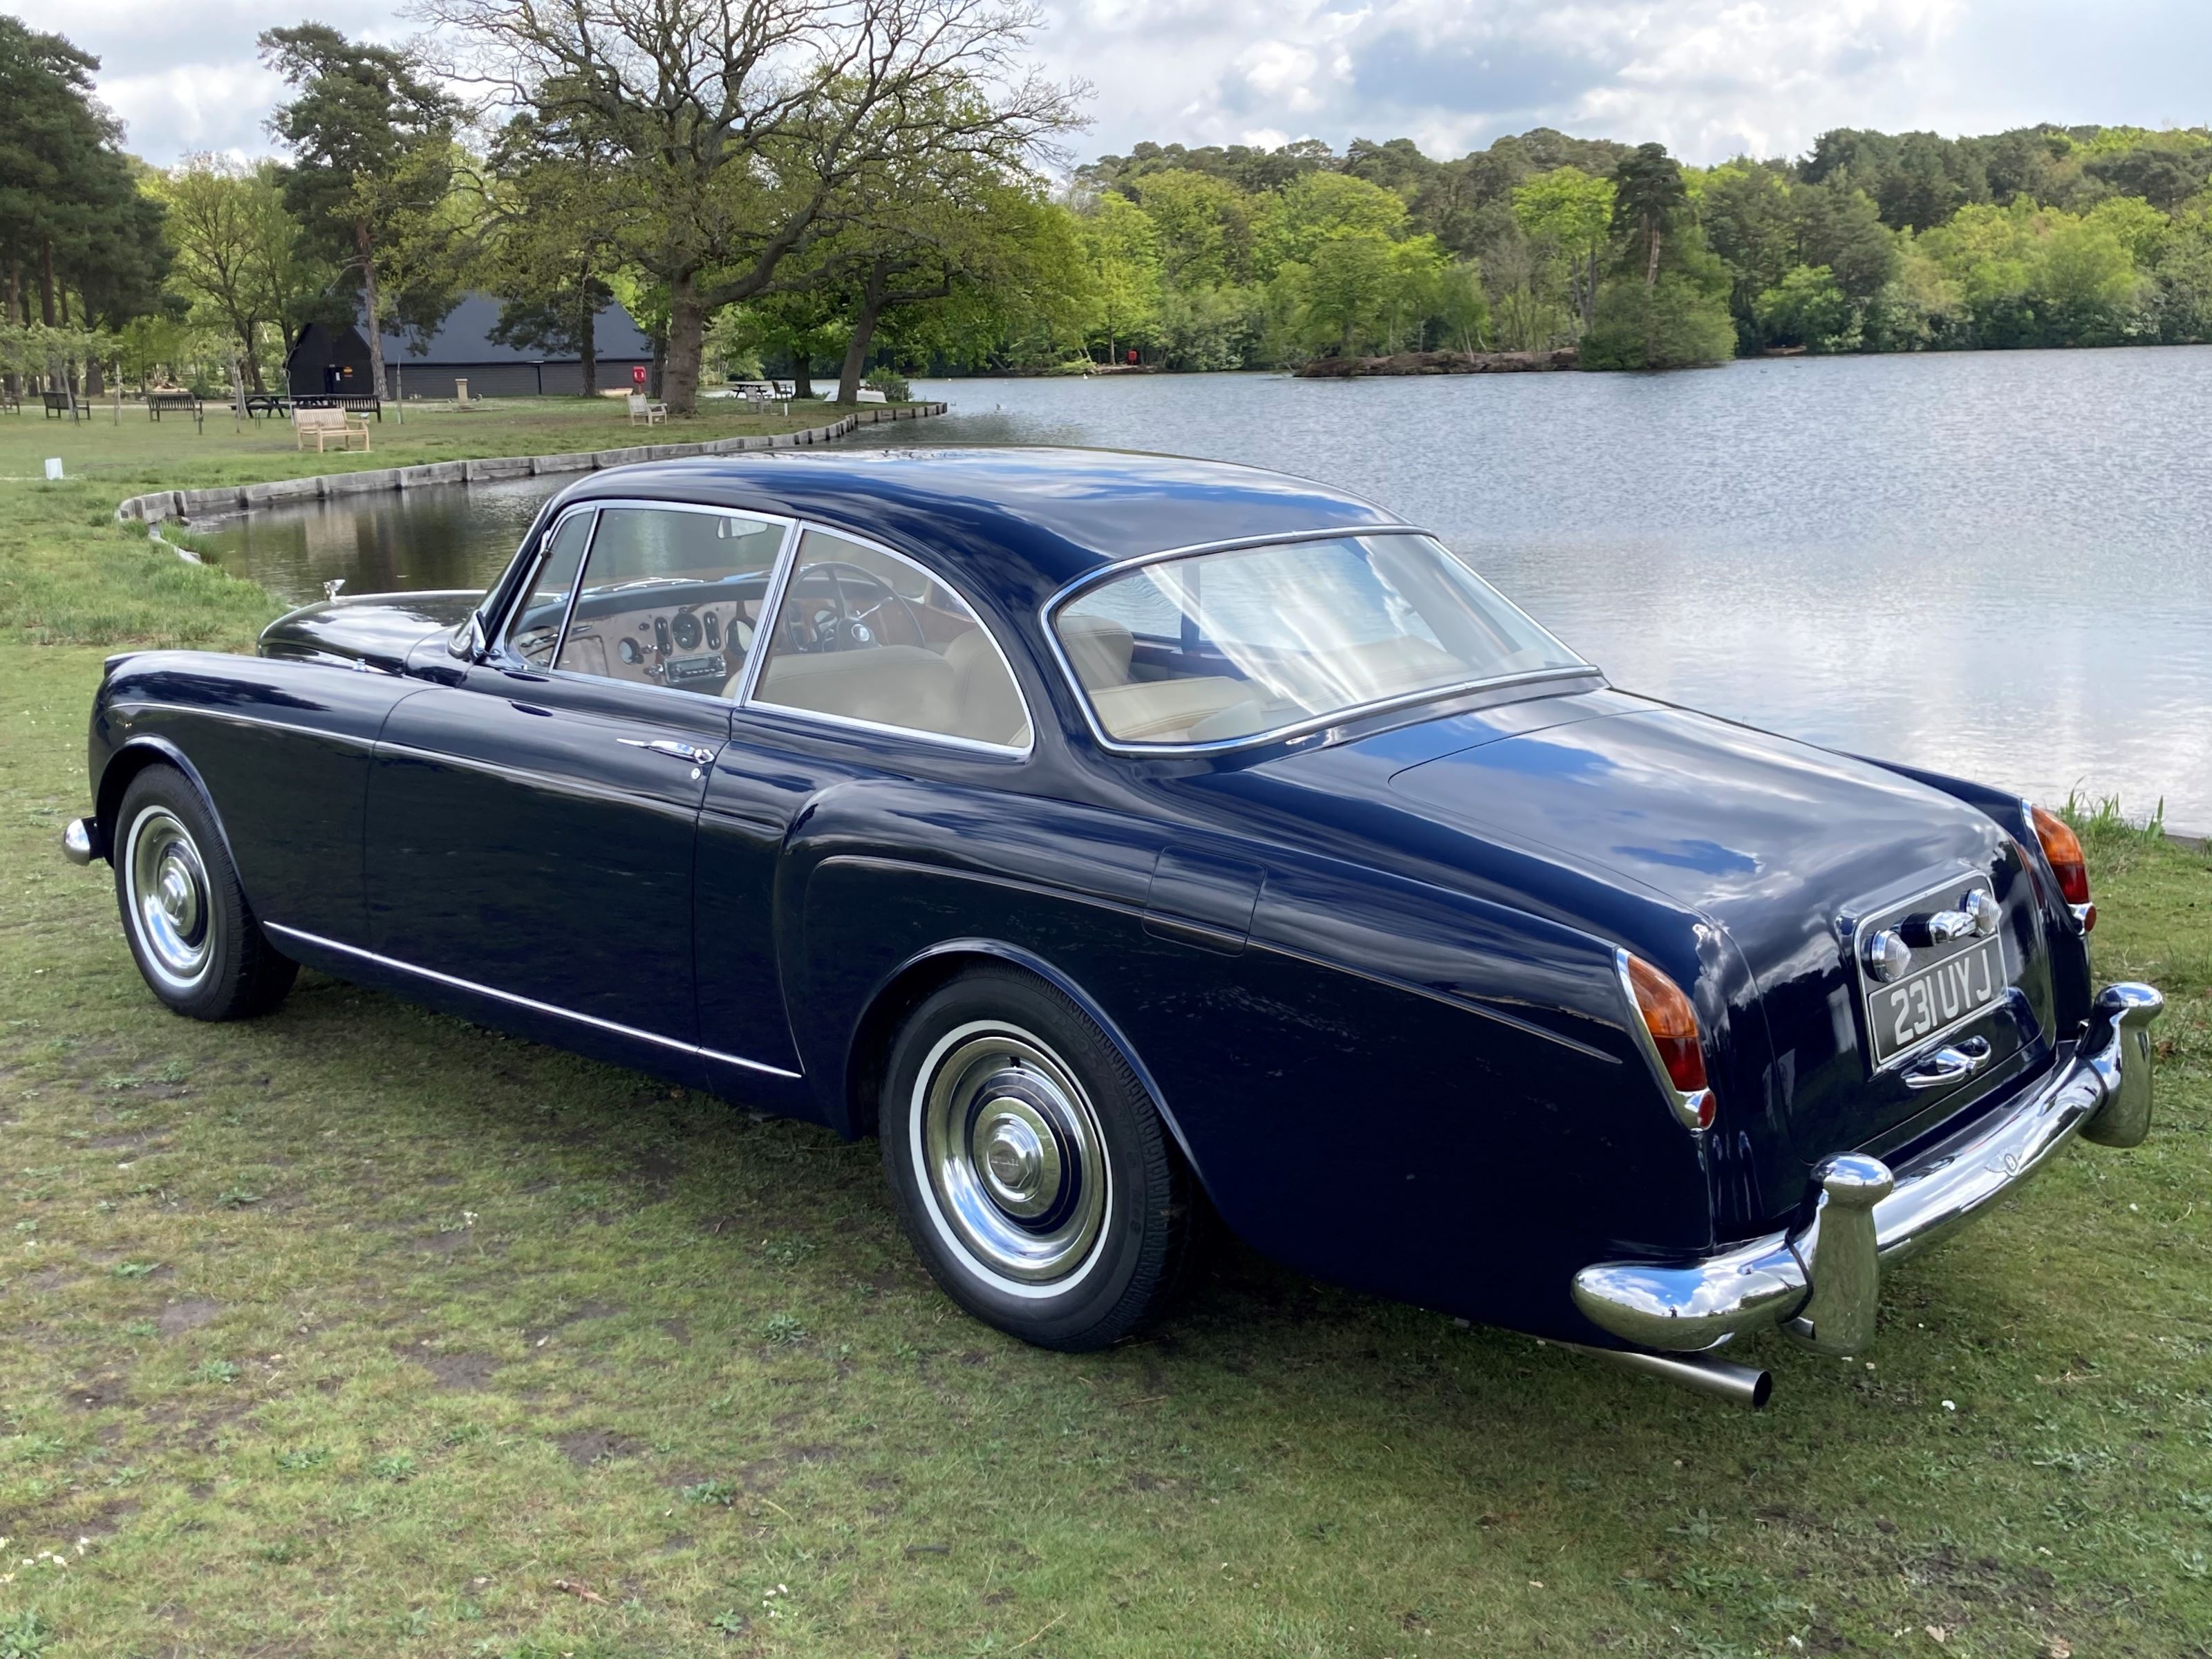 Bentley s2 continental  wnvfecxgnmv2rqktdmedr